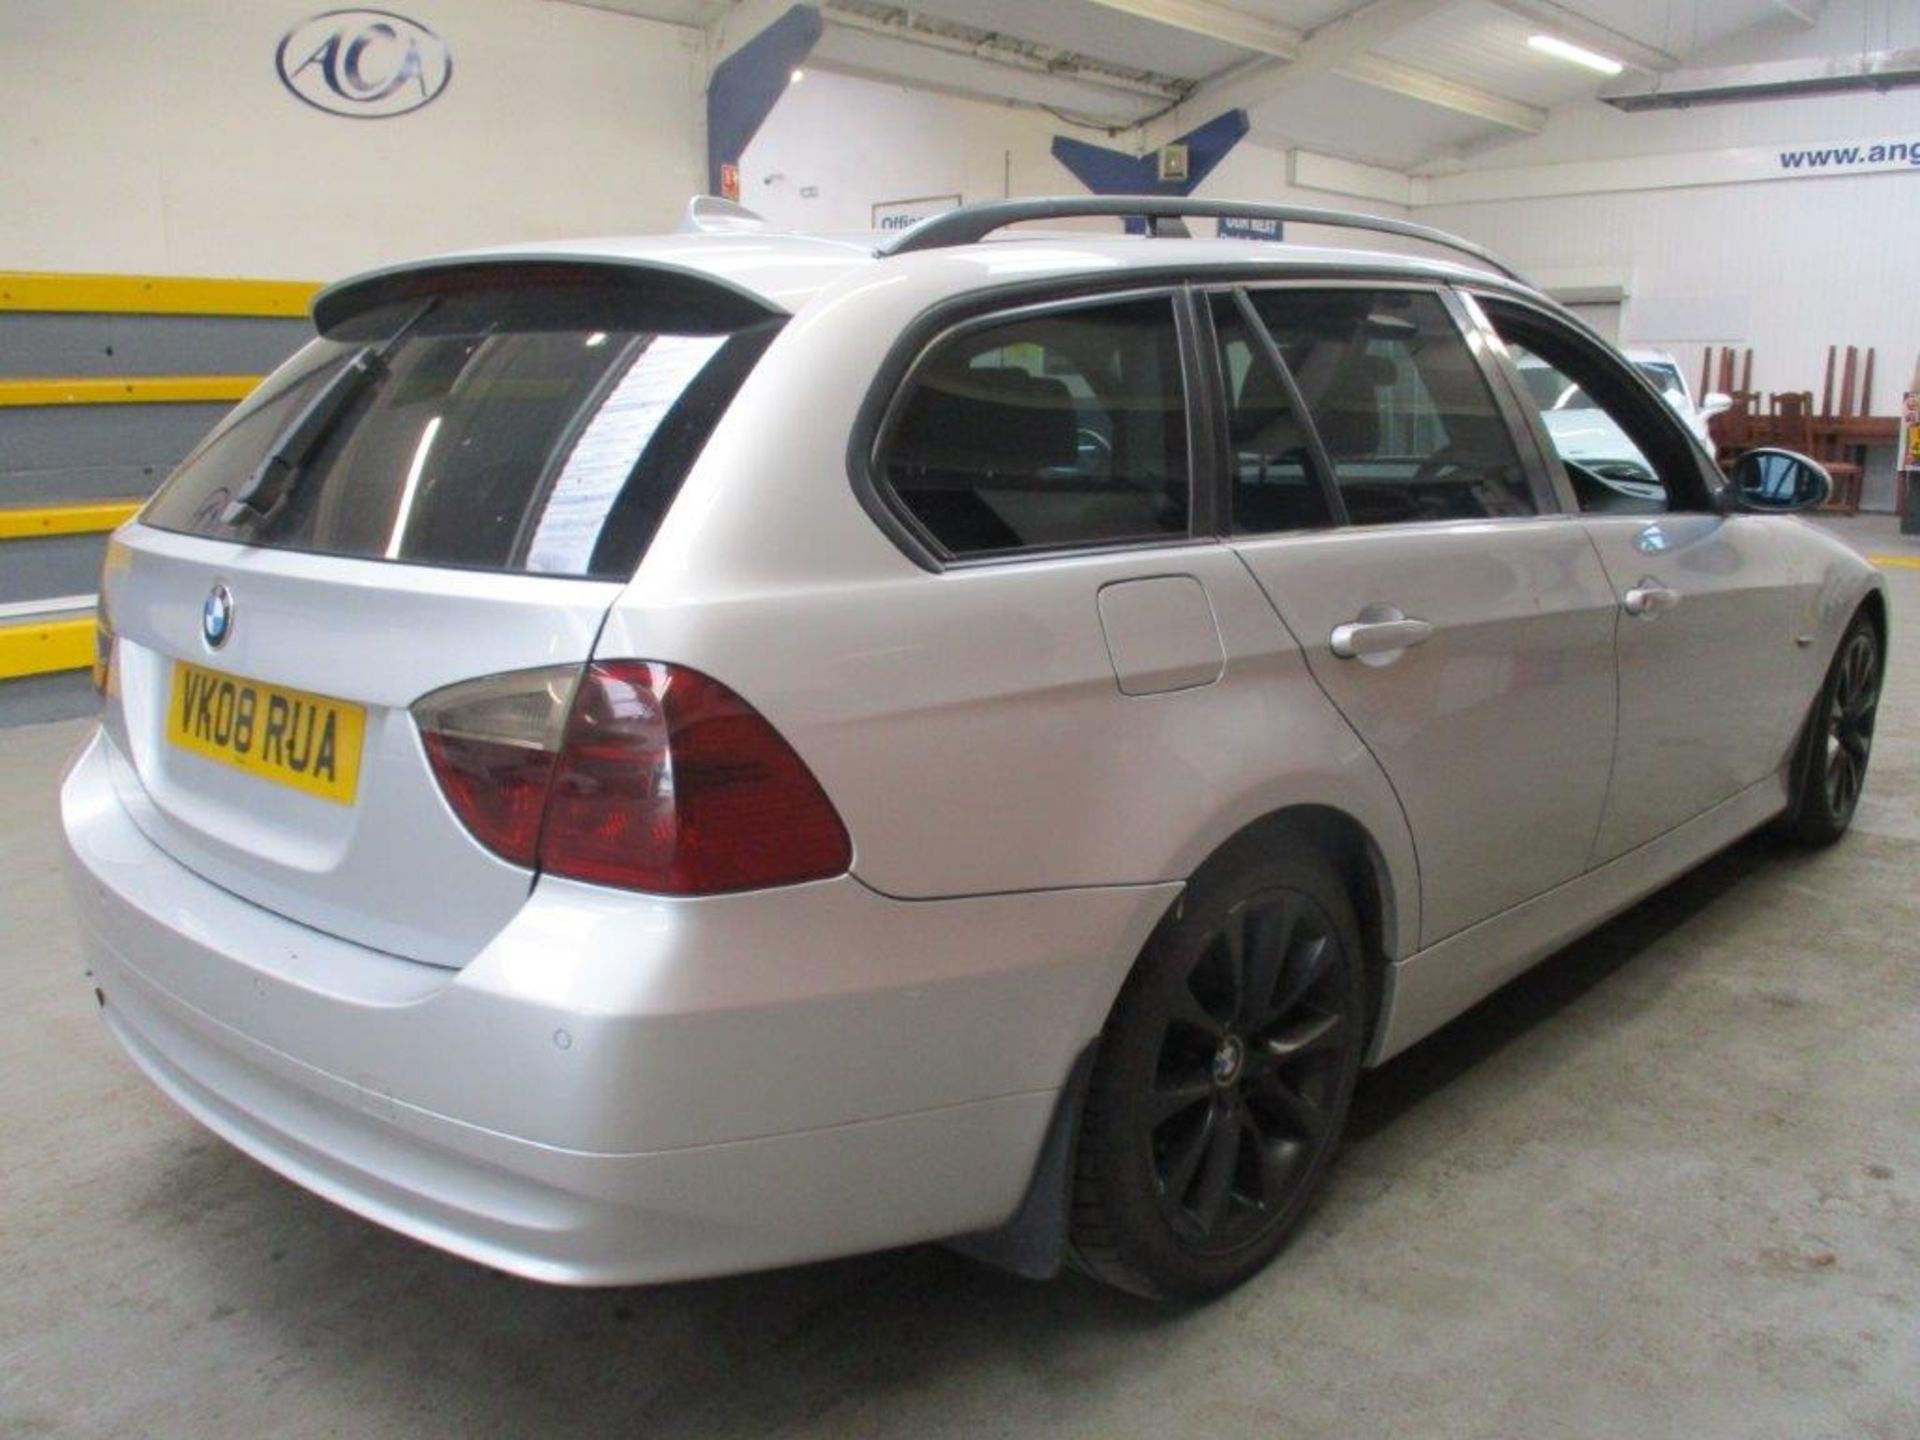 08 08 BMW 320D Edition SE Touring - Image 6 of 16